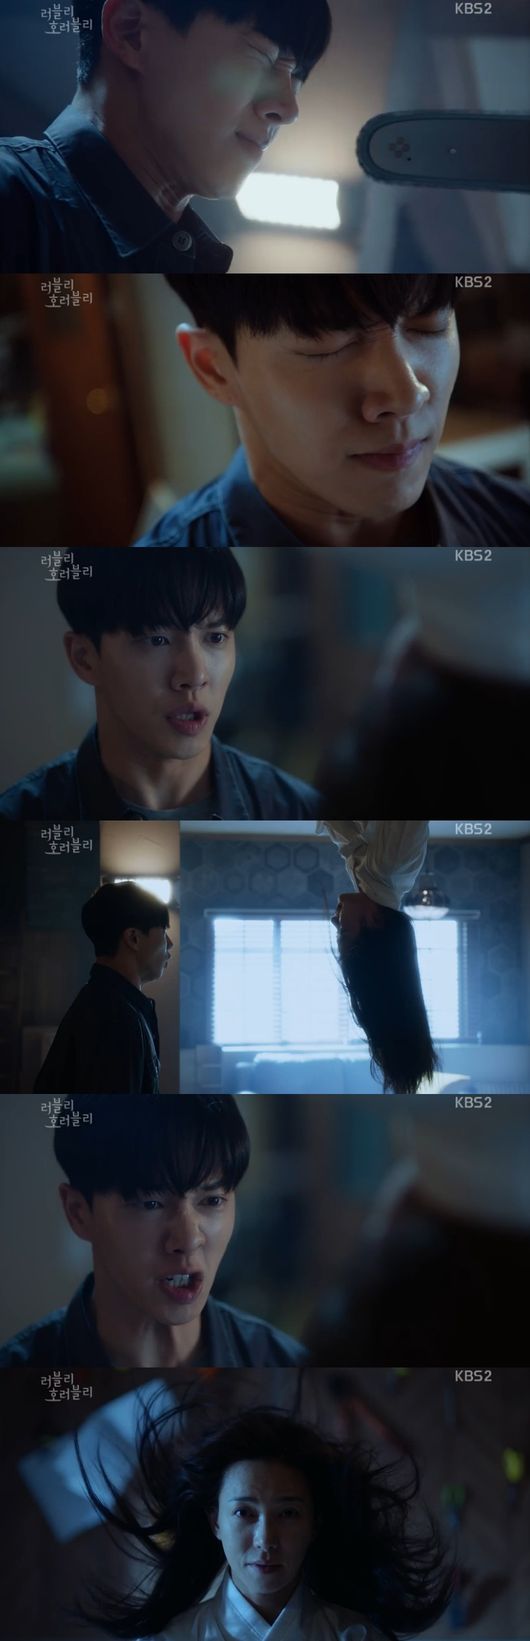 In Lovely Horrible, it was revealed that Park Si-hoo Young-nam Jang, who died of a ghost that was excited to Song Ji-hyo.On the 27th, KBS2TV monthly drama Lovely Horrible (directed by Kang Min-kyung, Ji Byung-hyun, and the play-played by Park Min-joo) showed the ghost Ok-hee (Young-nam Jang) in front of Sungjong (Lee Ki-kwang).On this day, Eulsun was embarrassed when the script was written on his forearm at the production presentation.Philip Roth, who did not know this, called Im Yoon-ah, and Eulsun recalled Philip Roth, who was shot and collapsed when he found a strange strange strange man approaching the bell.To prevent this, he headed to Philip Roth before the gunman approached, and then kissed Philip Roth, shouting, The person who is married to Mr. Philip Roth is not Mr. Im Yoon-ah but me.At this time, Philip Roths necklace bracelet was shining, and apples fell from the fruity apple tree.An old man sitting on an apple tree tasted the apple and said, I am rotten in this apple tree, and two people who are destined not to meet.Philip Roth hurried away with Eulsoon, whose real-time issue search term came up as a writer with a falsehood, and was caught up in strange rumors.Philip Roth asked why, and Eulsun said, The monster was holding a gun. He said he should have stopped himself.Philip Roth asked if he should have stopped it, and Eulsun said, Flow? Flow changes only when the flow changes.Then he wondered why the gunman was trying to kill Philip Roth, when Philip Roth robbed his clothes and the bracelet hanging on his arm fell.Eulsun gave me the brassette.At this time, Philip Roth reported from Kang that Eul Soon was about to announce the marriage by Im Yoon-ah, a plan to make a surprise wedding announcement.In fact, Im Yoon-ah said he paid for and prevented paparazzi photos of Philip Roth and Eulsun.Philip Roth was plagued by nightmares being attacked by Joo Eun-young, Rayeon and Eulsoon.At that time, Eulsun recalled Philip Roths words to write the script properly and recounted the word friend. Five copies were completed, and Sungjong received them.And the gunman also appeared and stole the script.Sungjong visited Eulsun, and felt the spirit of the ghost in Eulsuns house. Then he told Eulsun to ignore the writing on his arm.He said that if Eulsun had become a real reality, Eulsun would have been more dangerous. He worried about Eulsun, who would be more dangerous.Sungjong went to Eulsun with a late-night meal, and then he called it a script to write about who was going to kill God and who was wearing a black mask.I will save both the love of ghosts and Philip Roth. Sungjong asked if Philip Roth hated it, and Eulsun said, I understand.But Philip Roth was angry when he heard about the drama getting off.Nevertheless, Eulsun began Philip Roths mind-turning operation, saying he had settled it, saying that he was full of love for the protagonist and had no personal feelings at all.Sungjong saw the black energy again at Eulsuns house. Eulsun suddenly heard a song and concentrated on listening to it. Then he asked Sungjong to go to the assistant artist.Sungjong found the ceiling pierced, and told Eulsun to use it as a workshop because he would give an empty house. This work is really important, he said. If personal feelings are intertwined in work, it is difficult.I know my heart, but lets talk again after the drama is over. I smiled shyly. Until then, I wanted to keep the line beautifully, and I was surprised when Sungjong took his hand.Sungjong said, No matter how hard it is, lets not let go of your mind.Detectives searched the house of Joo Eun-young, where the castle was in front of it, and entered the house with a black aura.I know youre in the air, he said. I just came to ask.The castle moved along the black shadow energy and asked, Is it you who gives the owl the love of ghosts? But the ghost attacked the castle.When Sungjong shouted, Is it related to your Philip Roth?, The ghost said, Close your eyes like that, do not intervene, and You can never stop it.It was Young-nam Jang of Philip Roth.